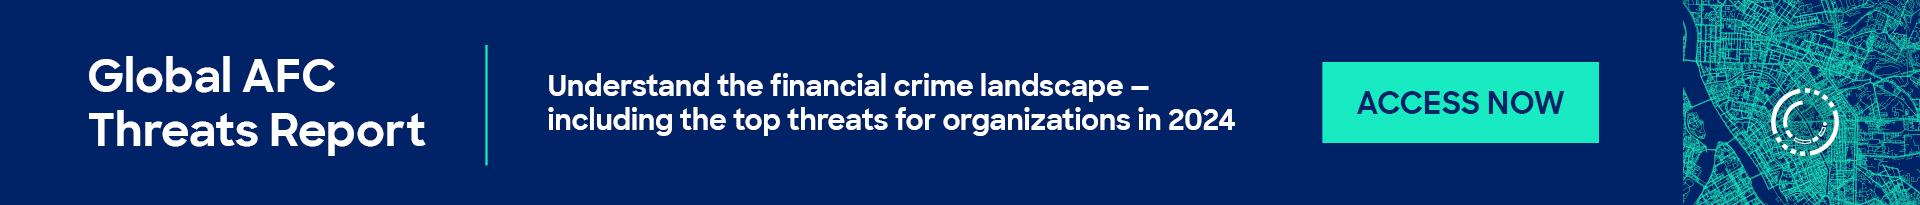 Global AFC Threats Report: Understand the financial crime landscape – including the top threats for organizations in 2024